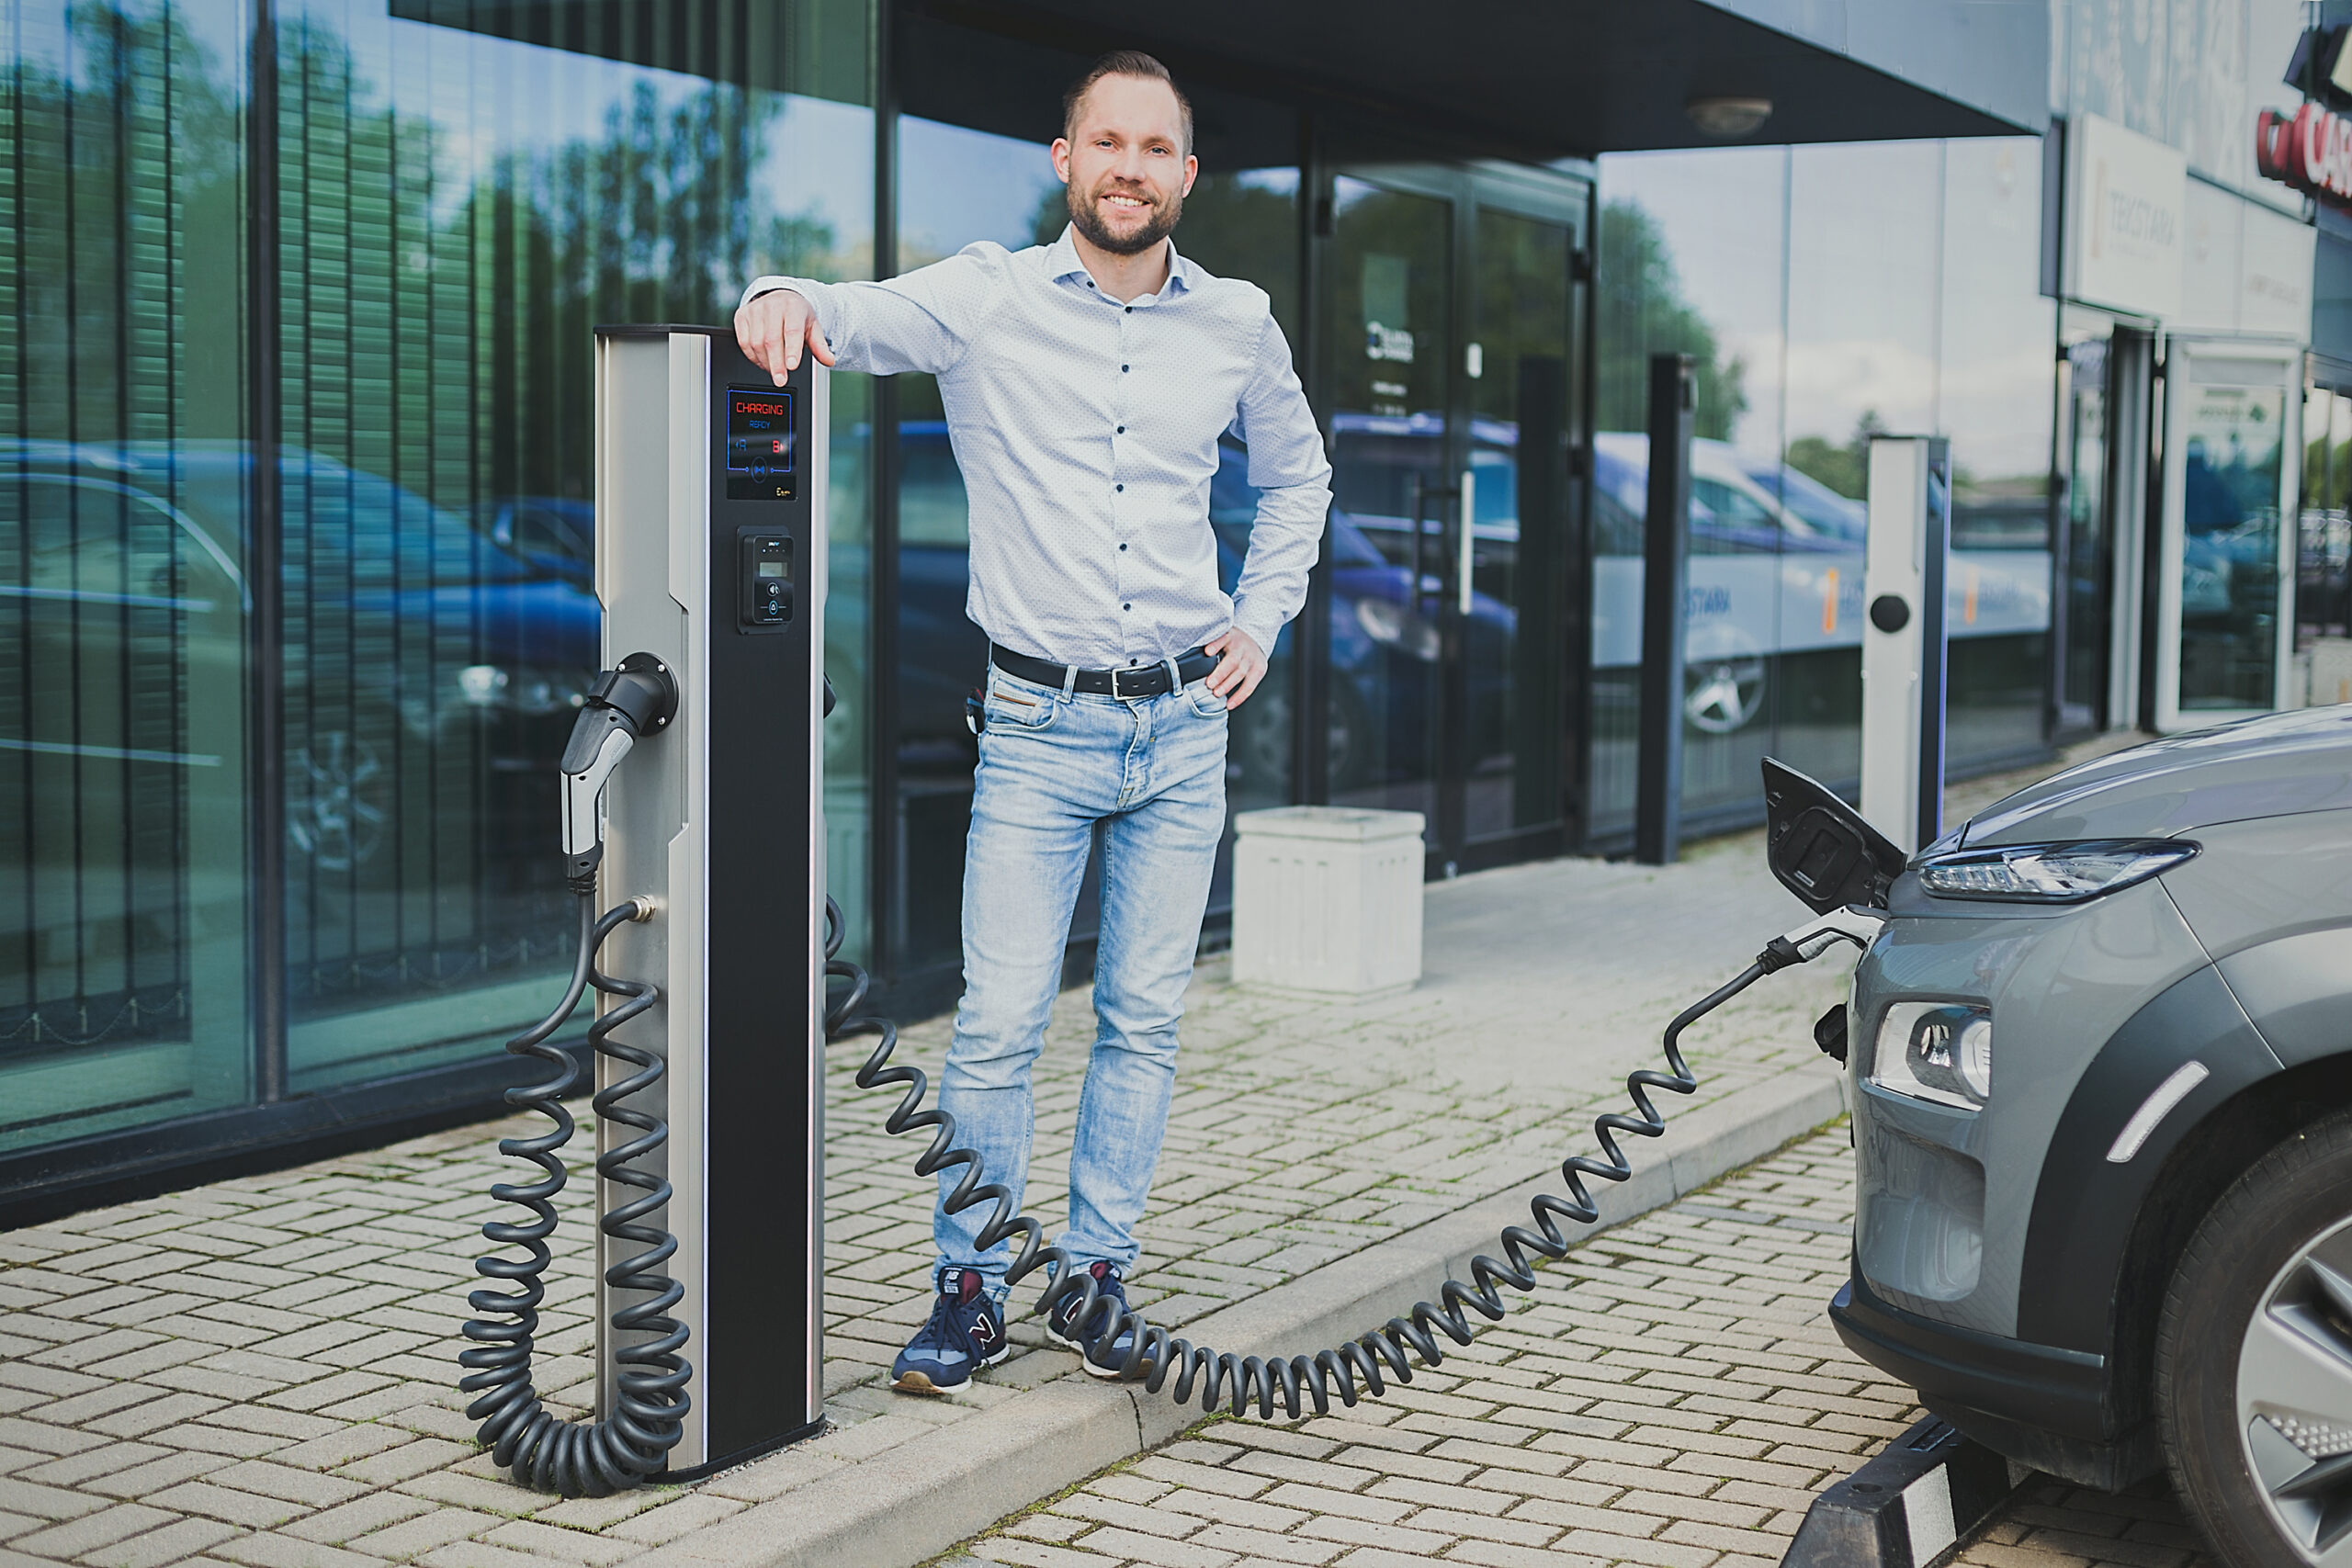 AVIA Capital and LitCapital have invested €7 million in EV chargers developer and producer Elinta Charge